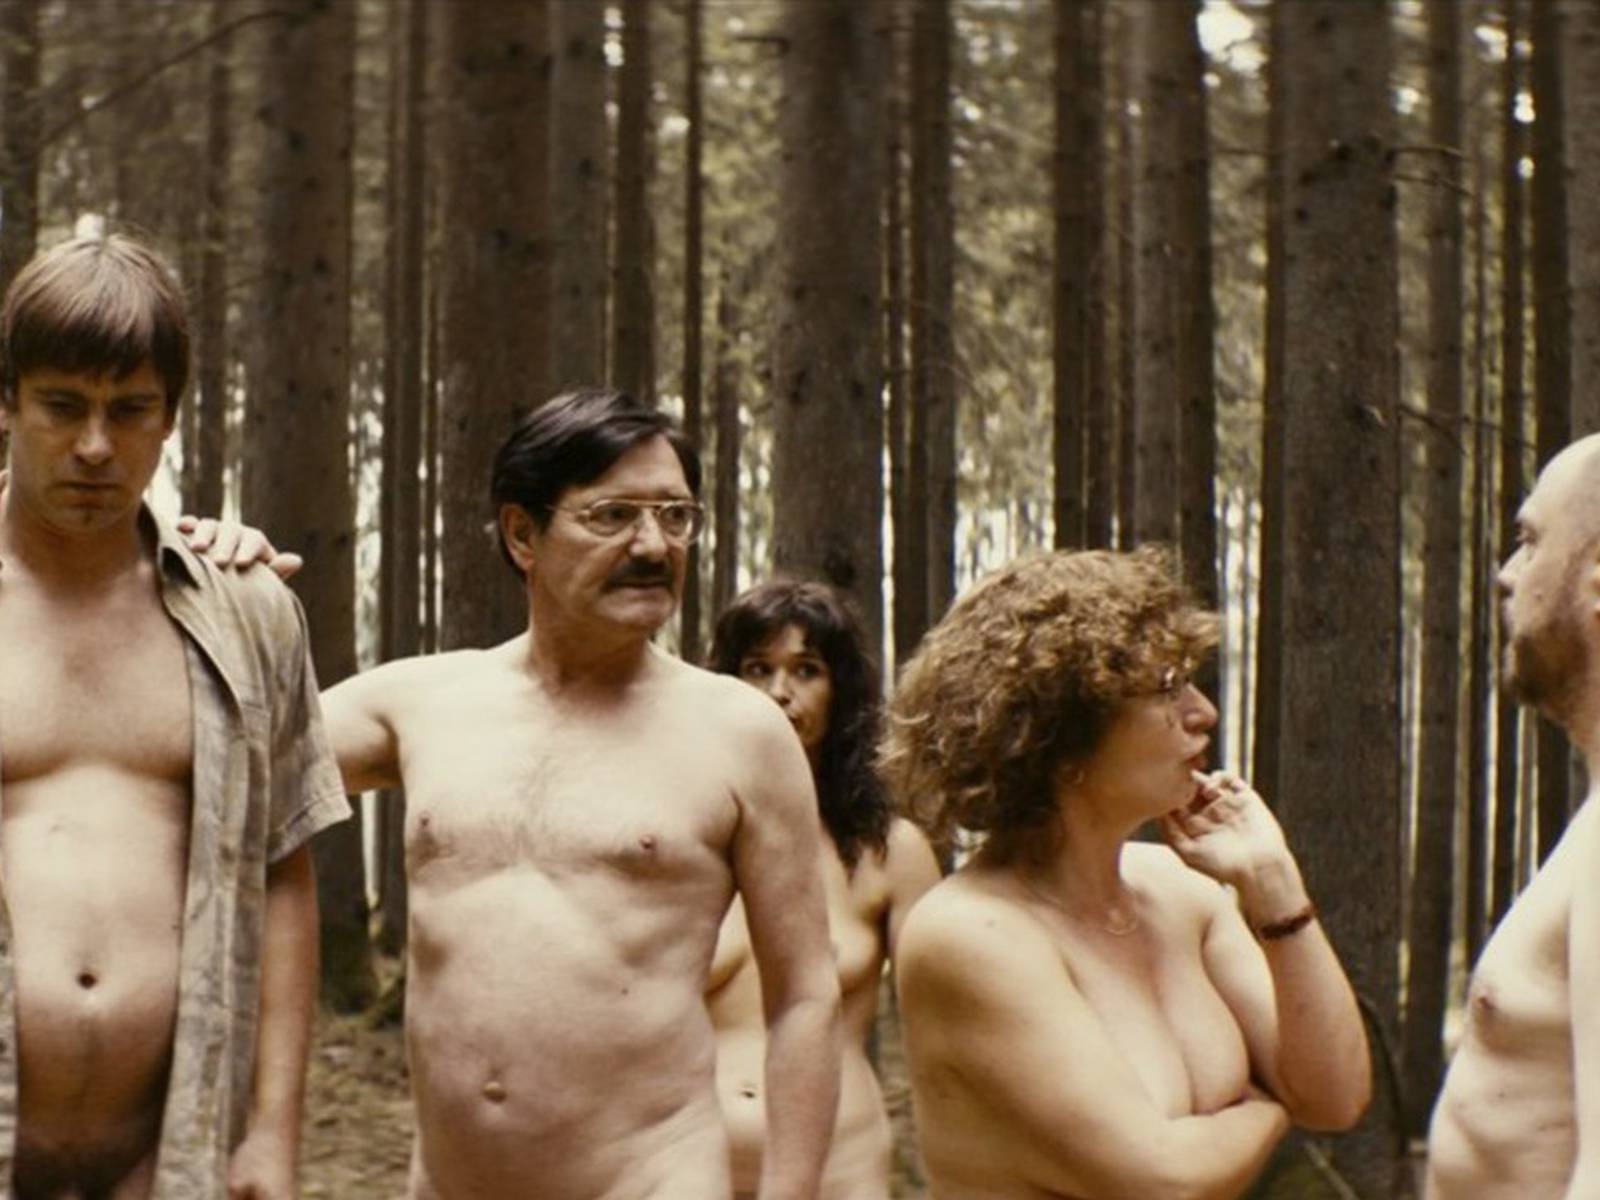 andrew doucet recommends Videos Of Nudist Camps